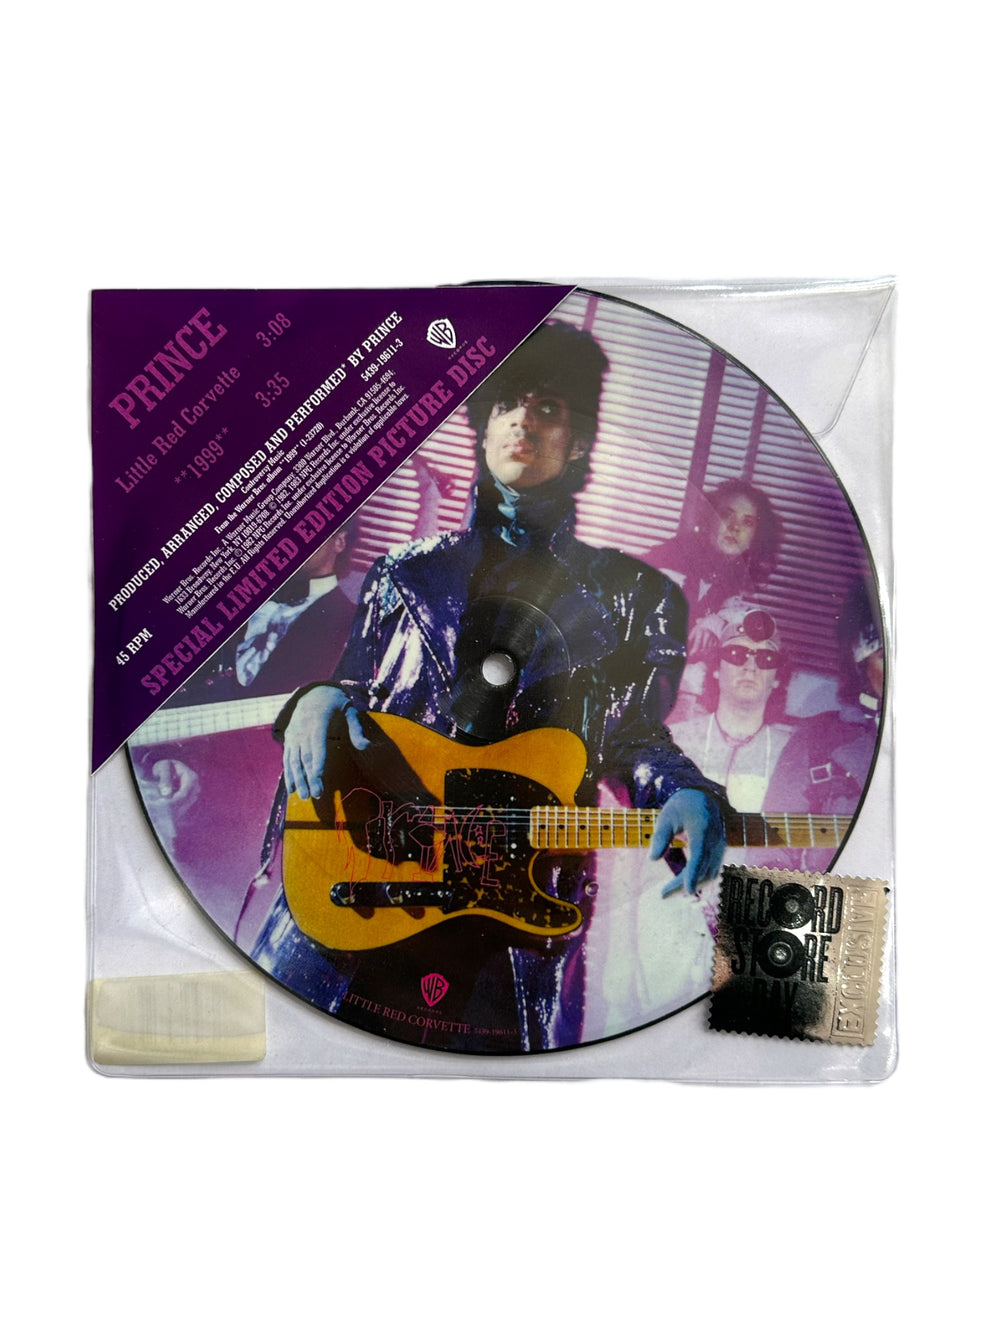 Prince 1999 / Little Red Corvette 7 Inch Single Record Store Day 2017 Picture Disc